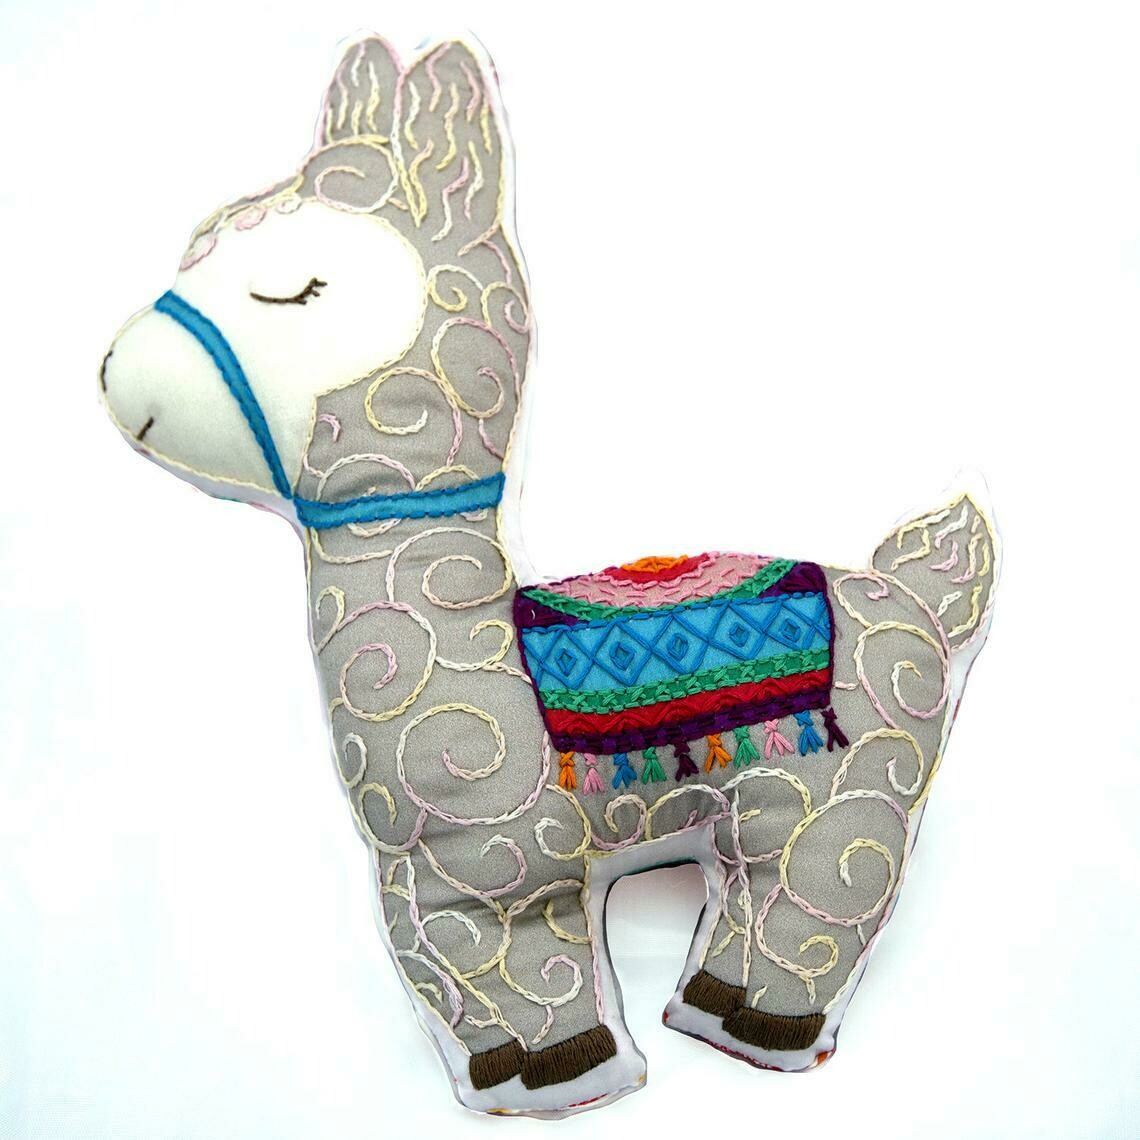 SALE - Crafty Creatures Embroidery Kit - Llama